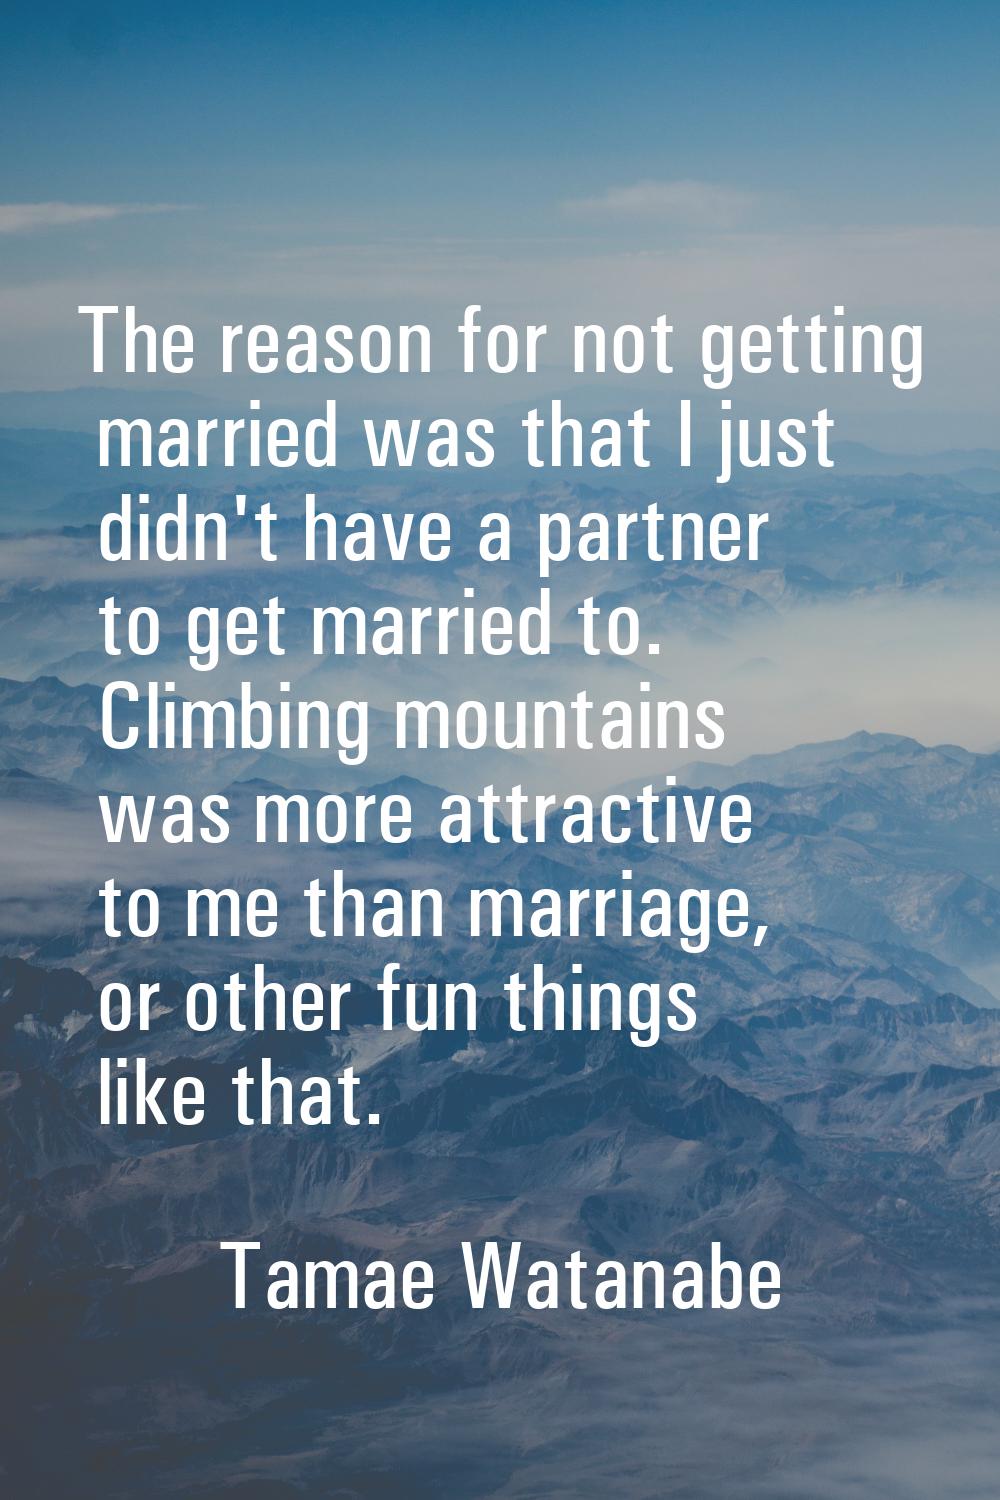 The reason for not getting married was that I just didn't have a partner to get married to. Climbin